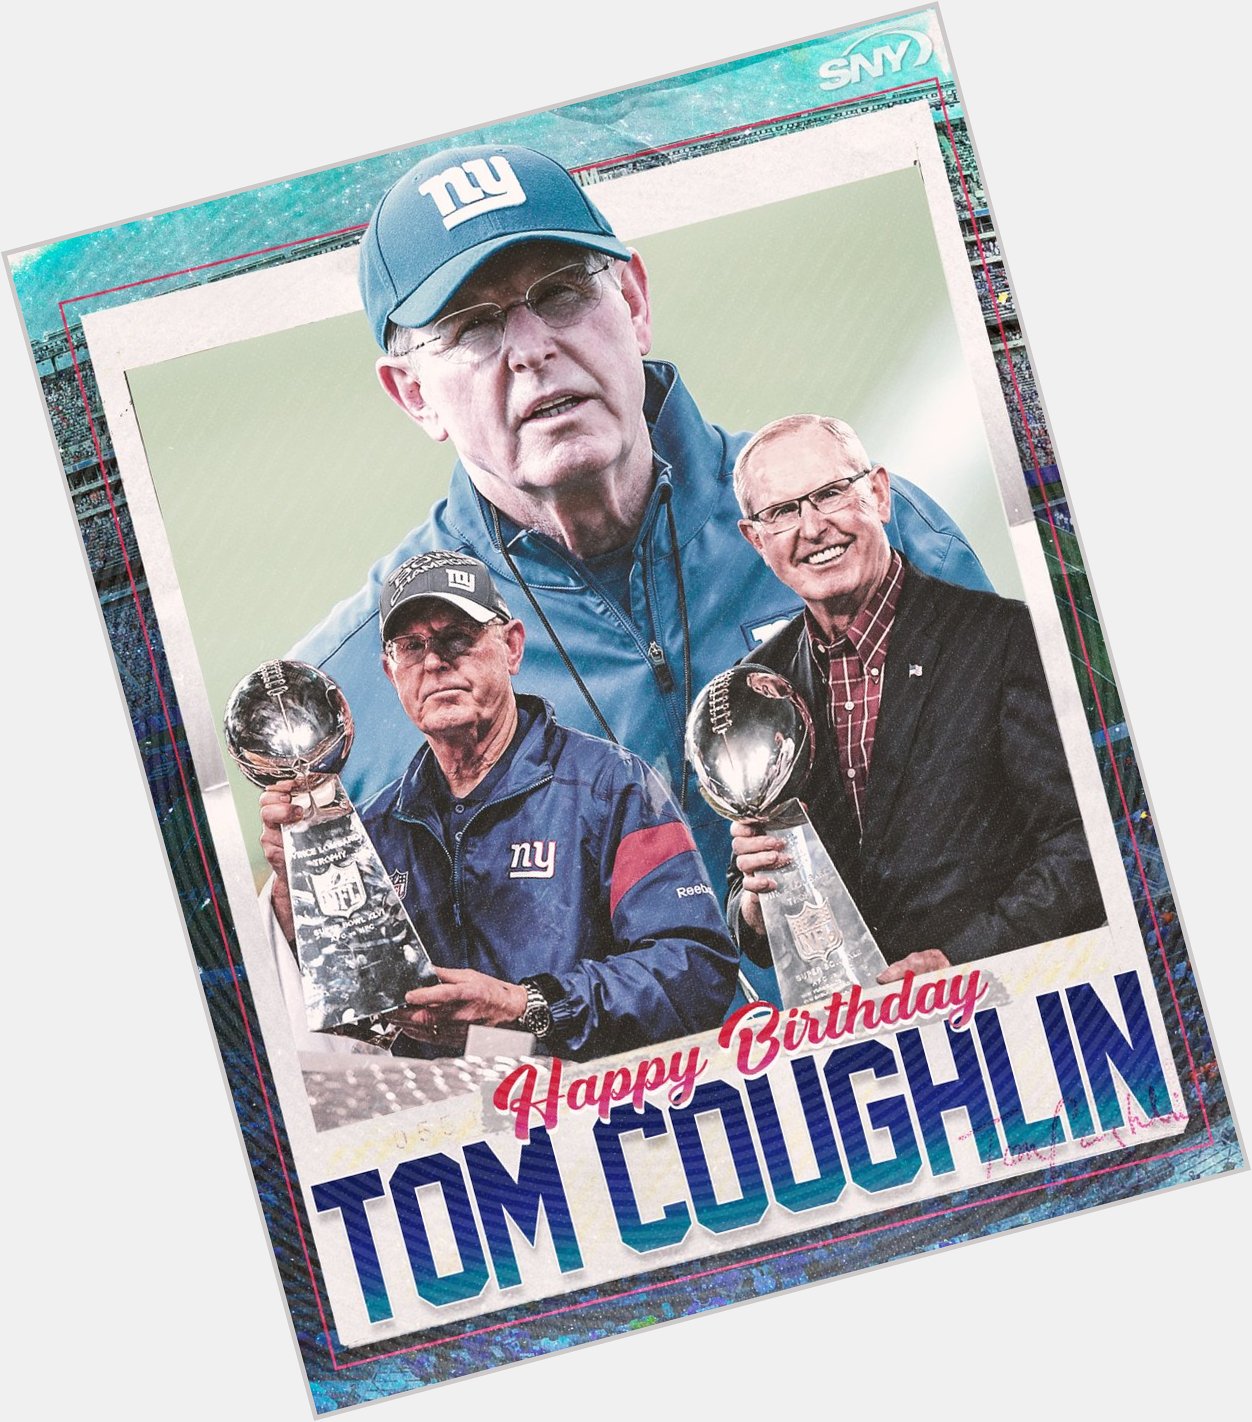 Happy birthday to Tom Coughlin! 